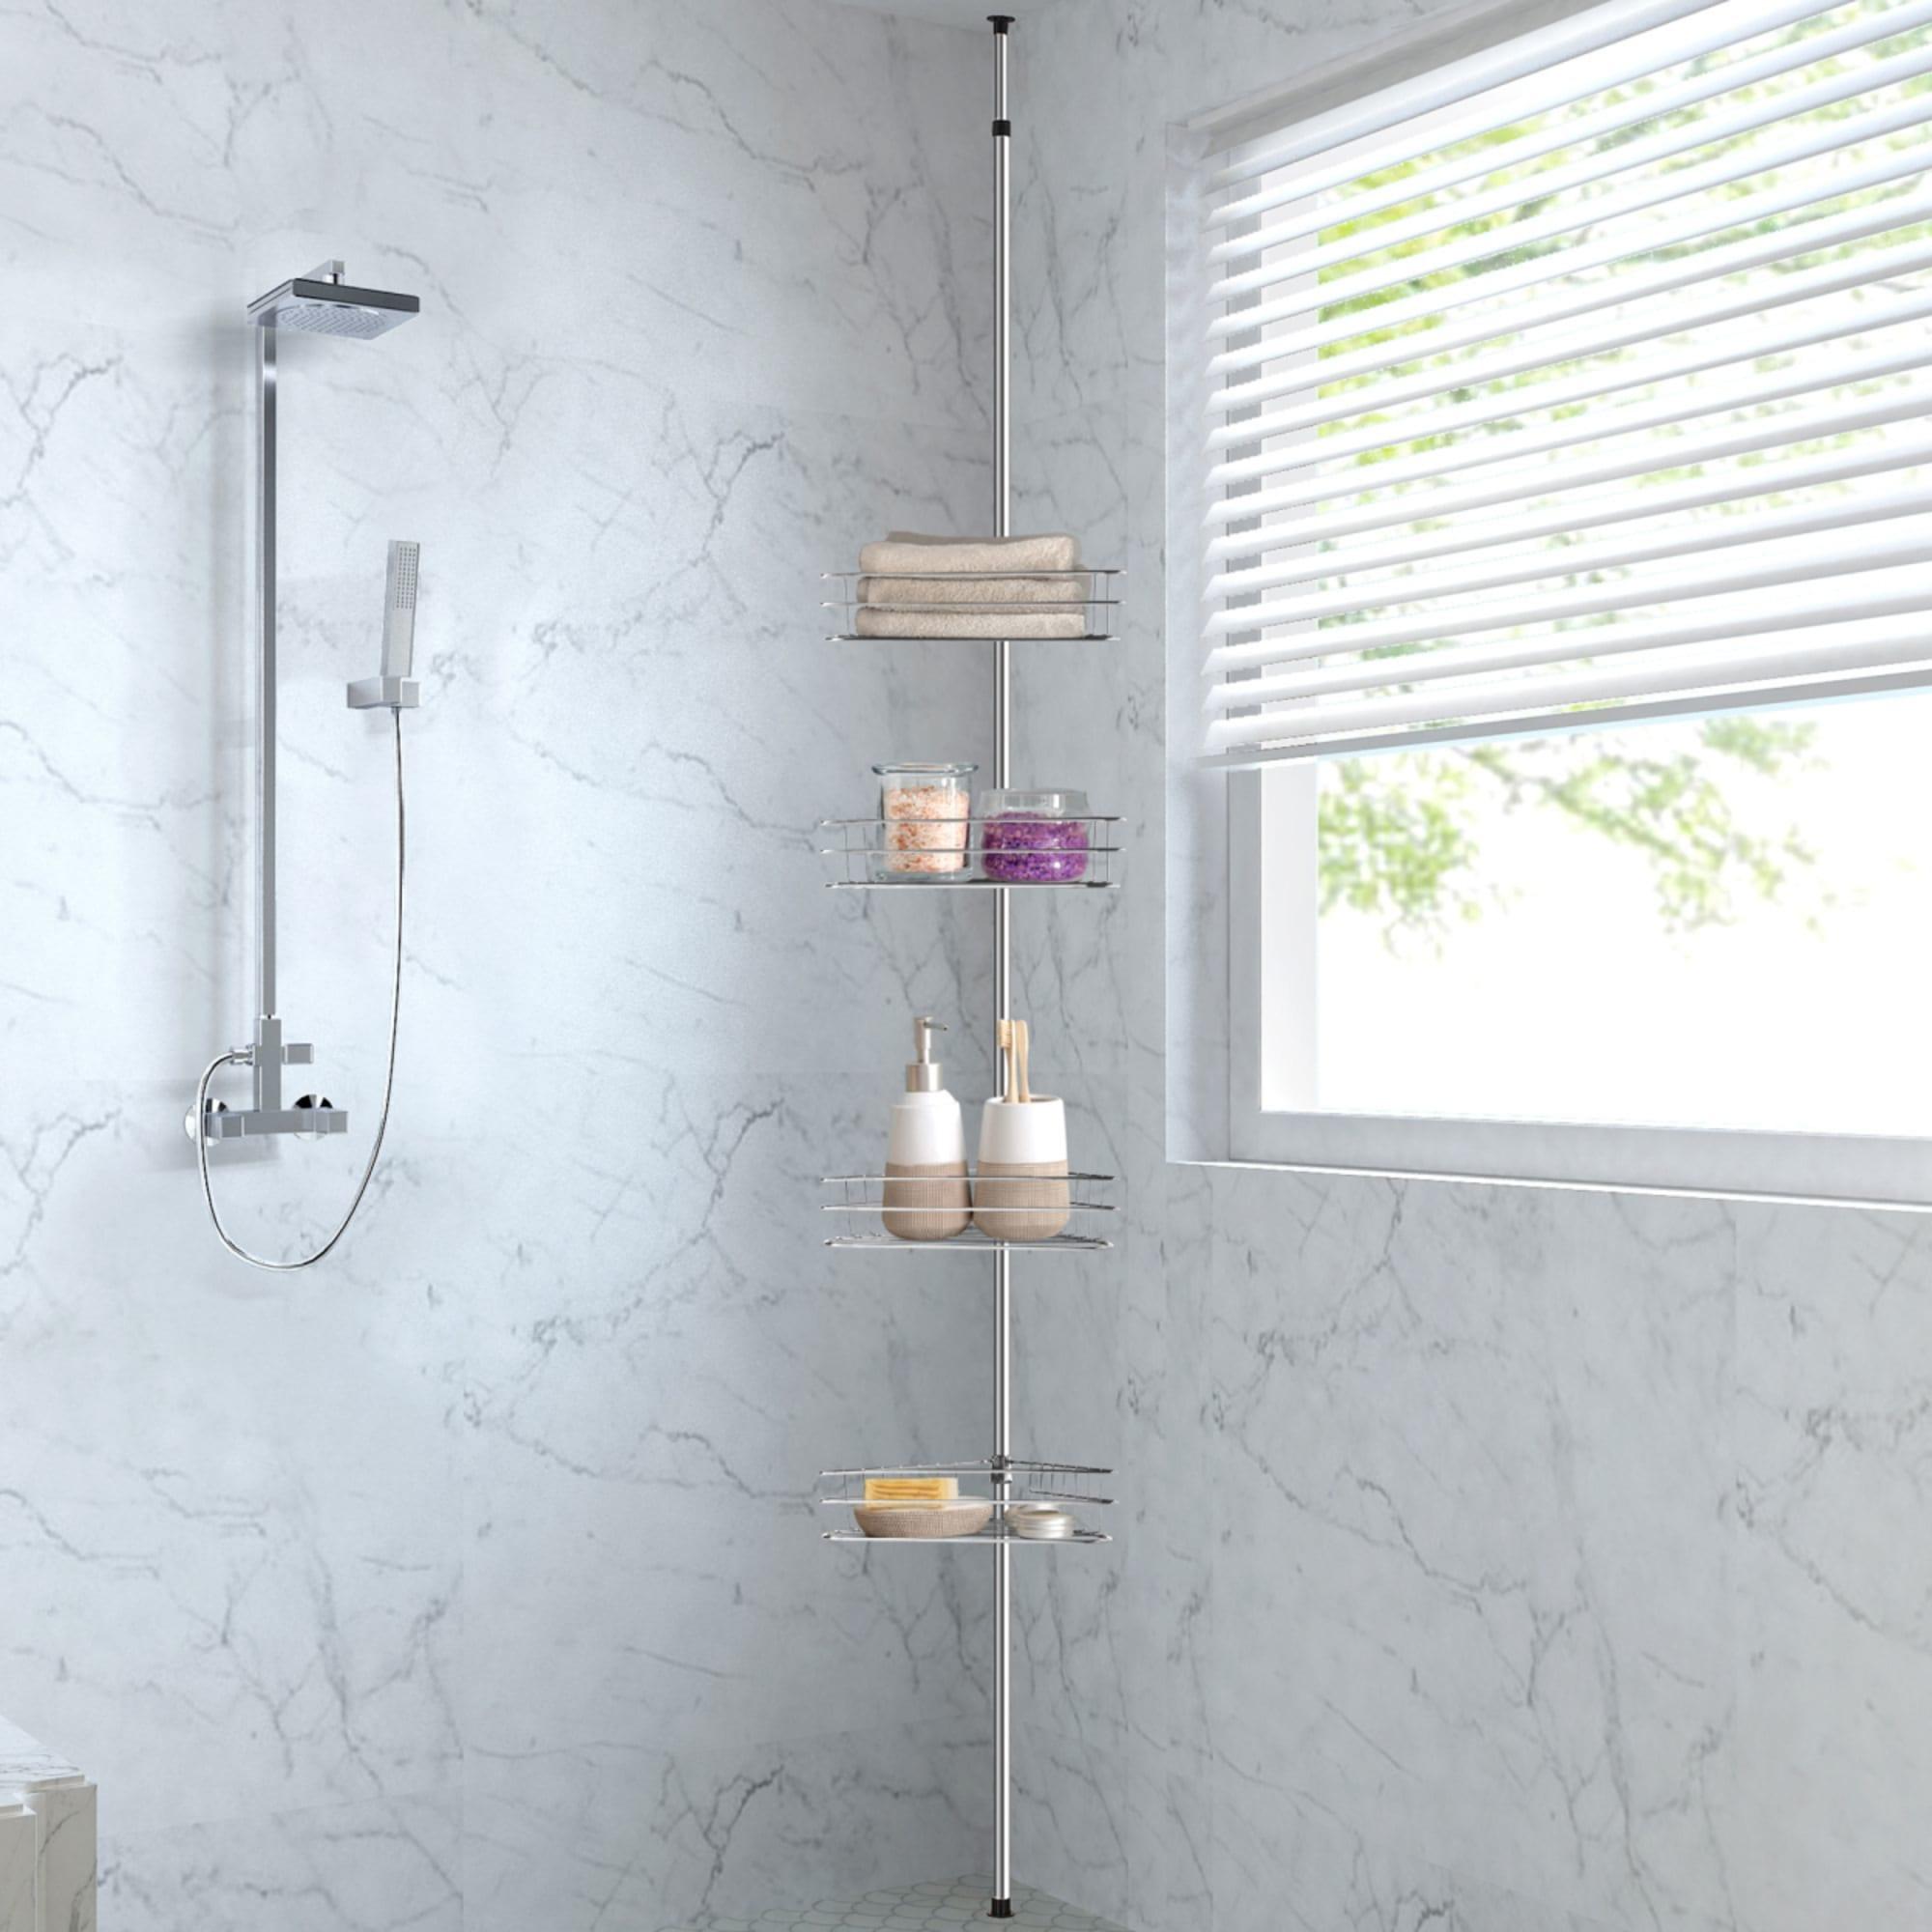 Sherwood Home 4 Tier Shower Caddy Silver Image 2